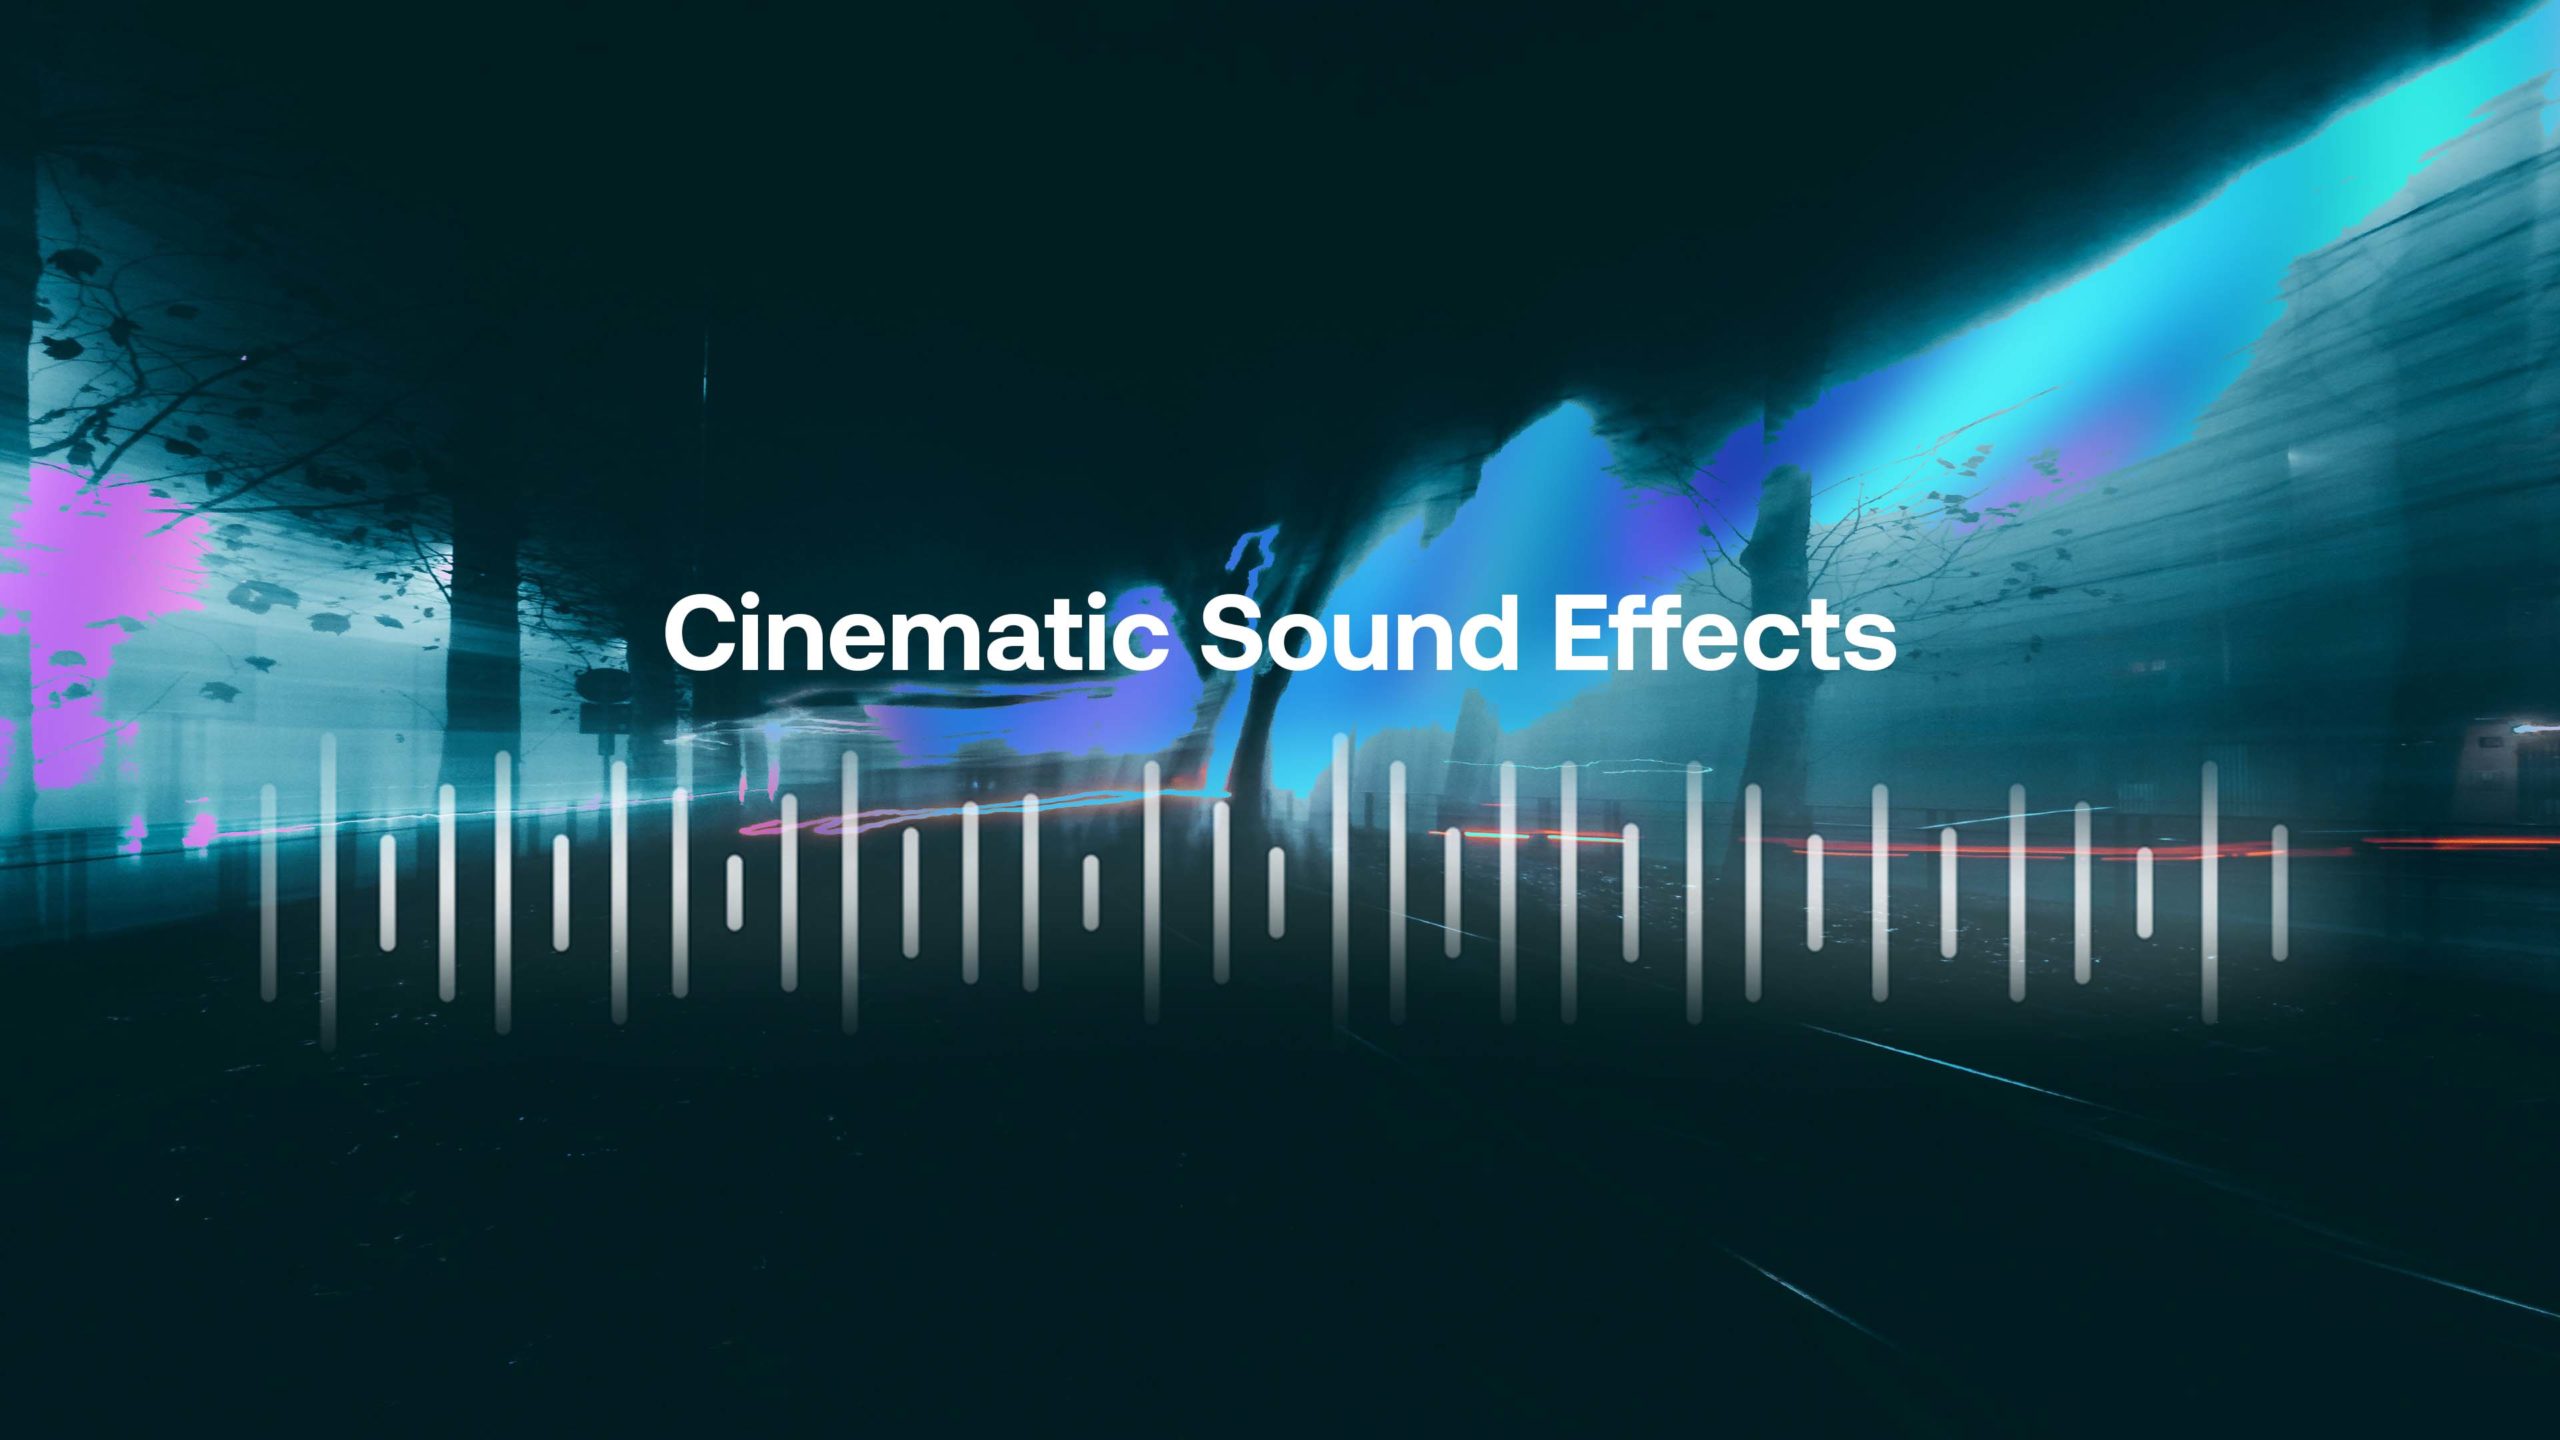 24 Best Cinematic Sound Effects Packs for Trailers & Movie Openers - Motion  Array